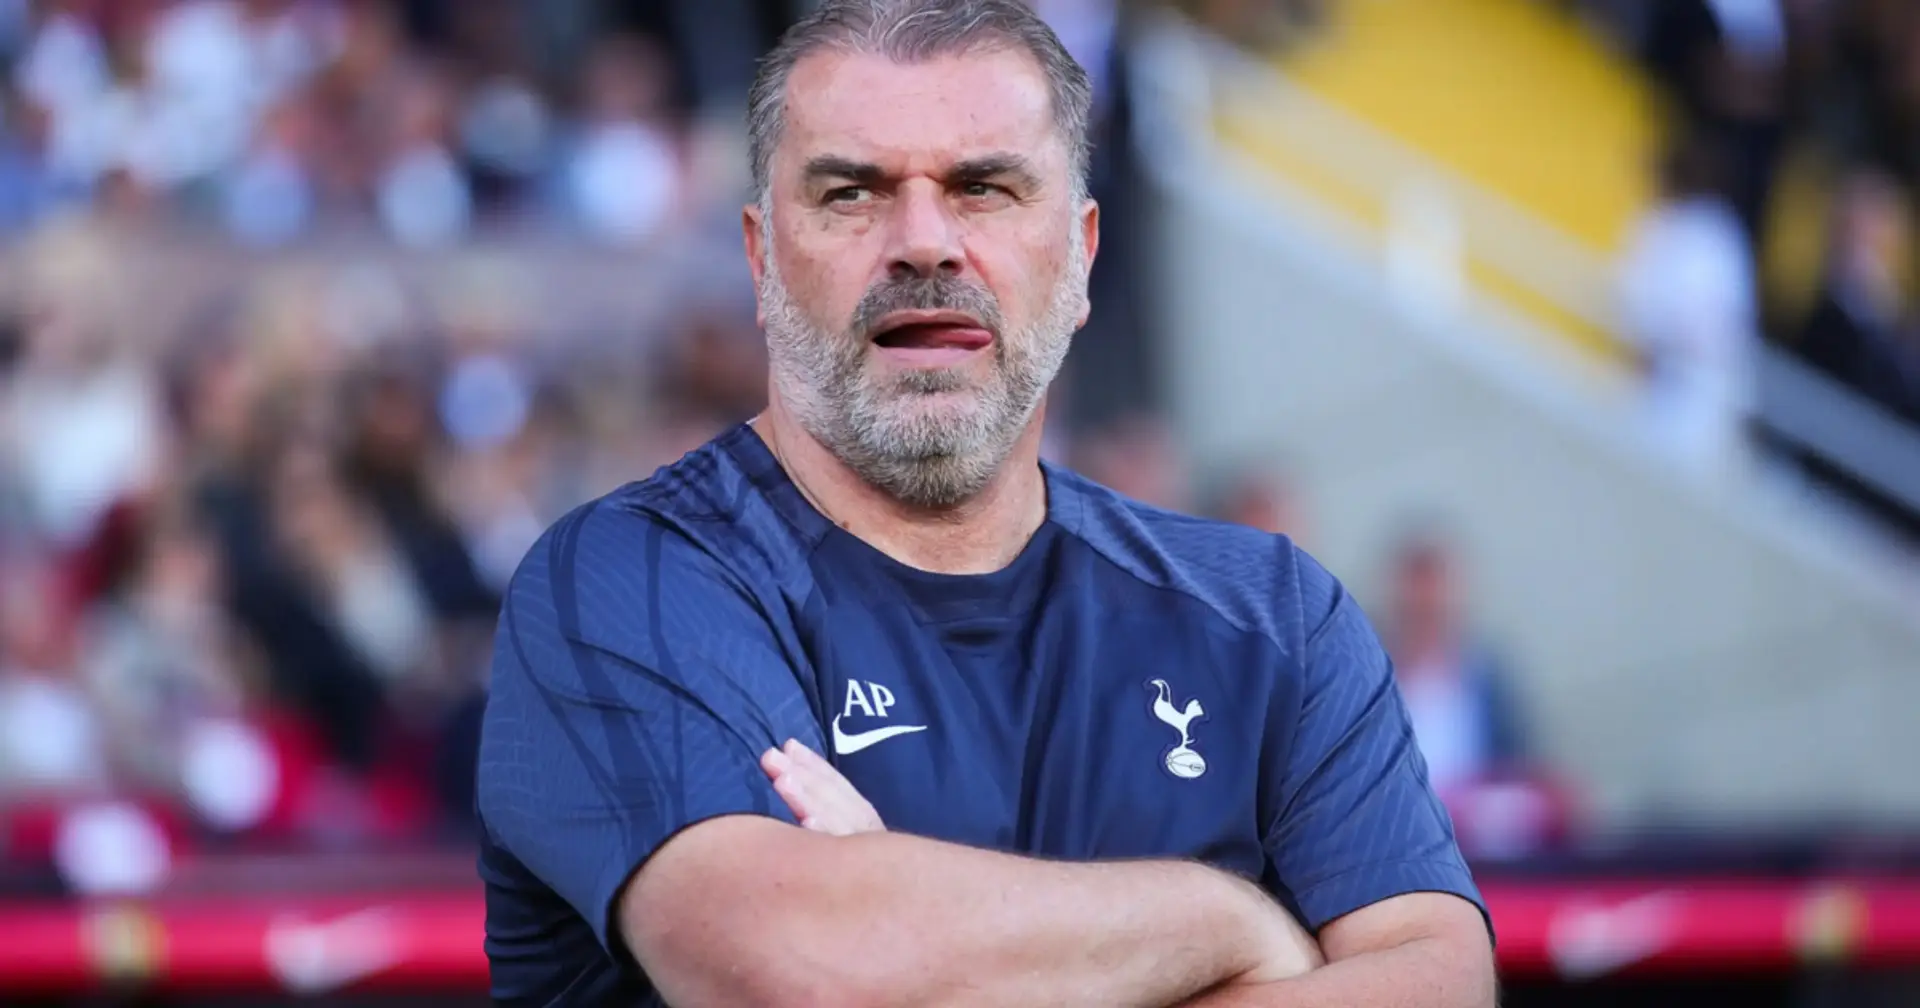 'Shame on you FIFA': Global fans rip into Ange Postecoglou being named on The Best Men's Coach shortlist